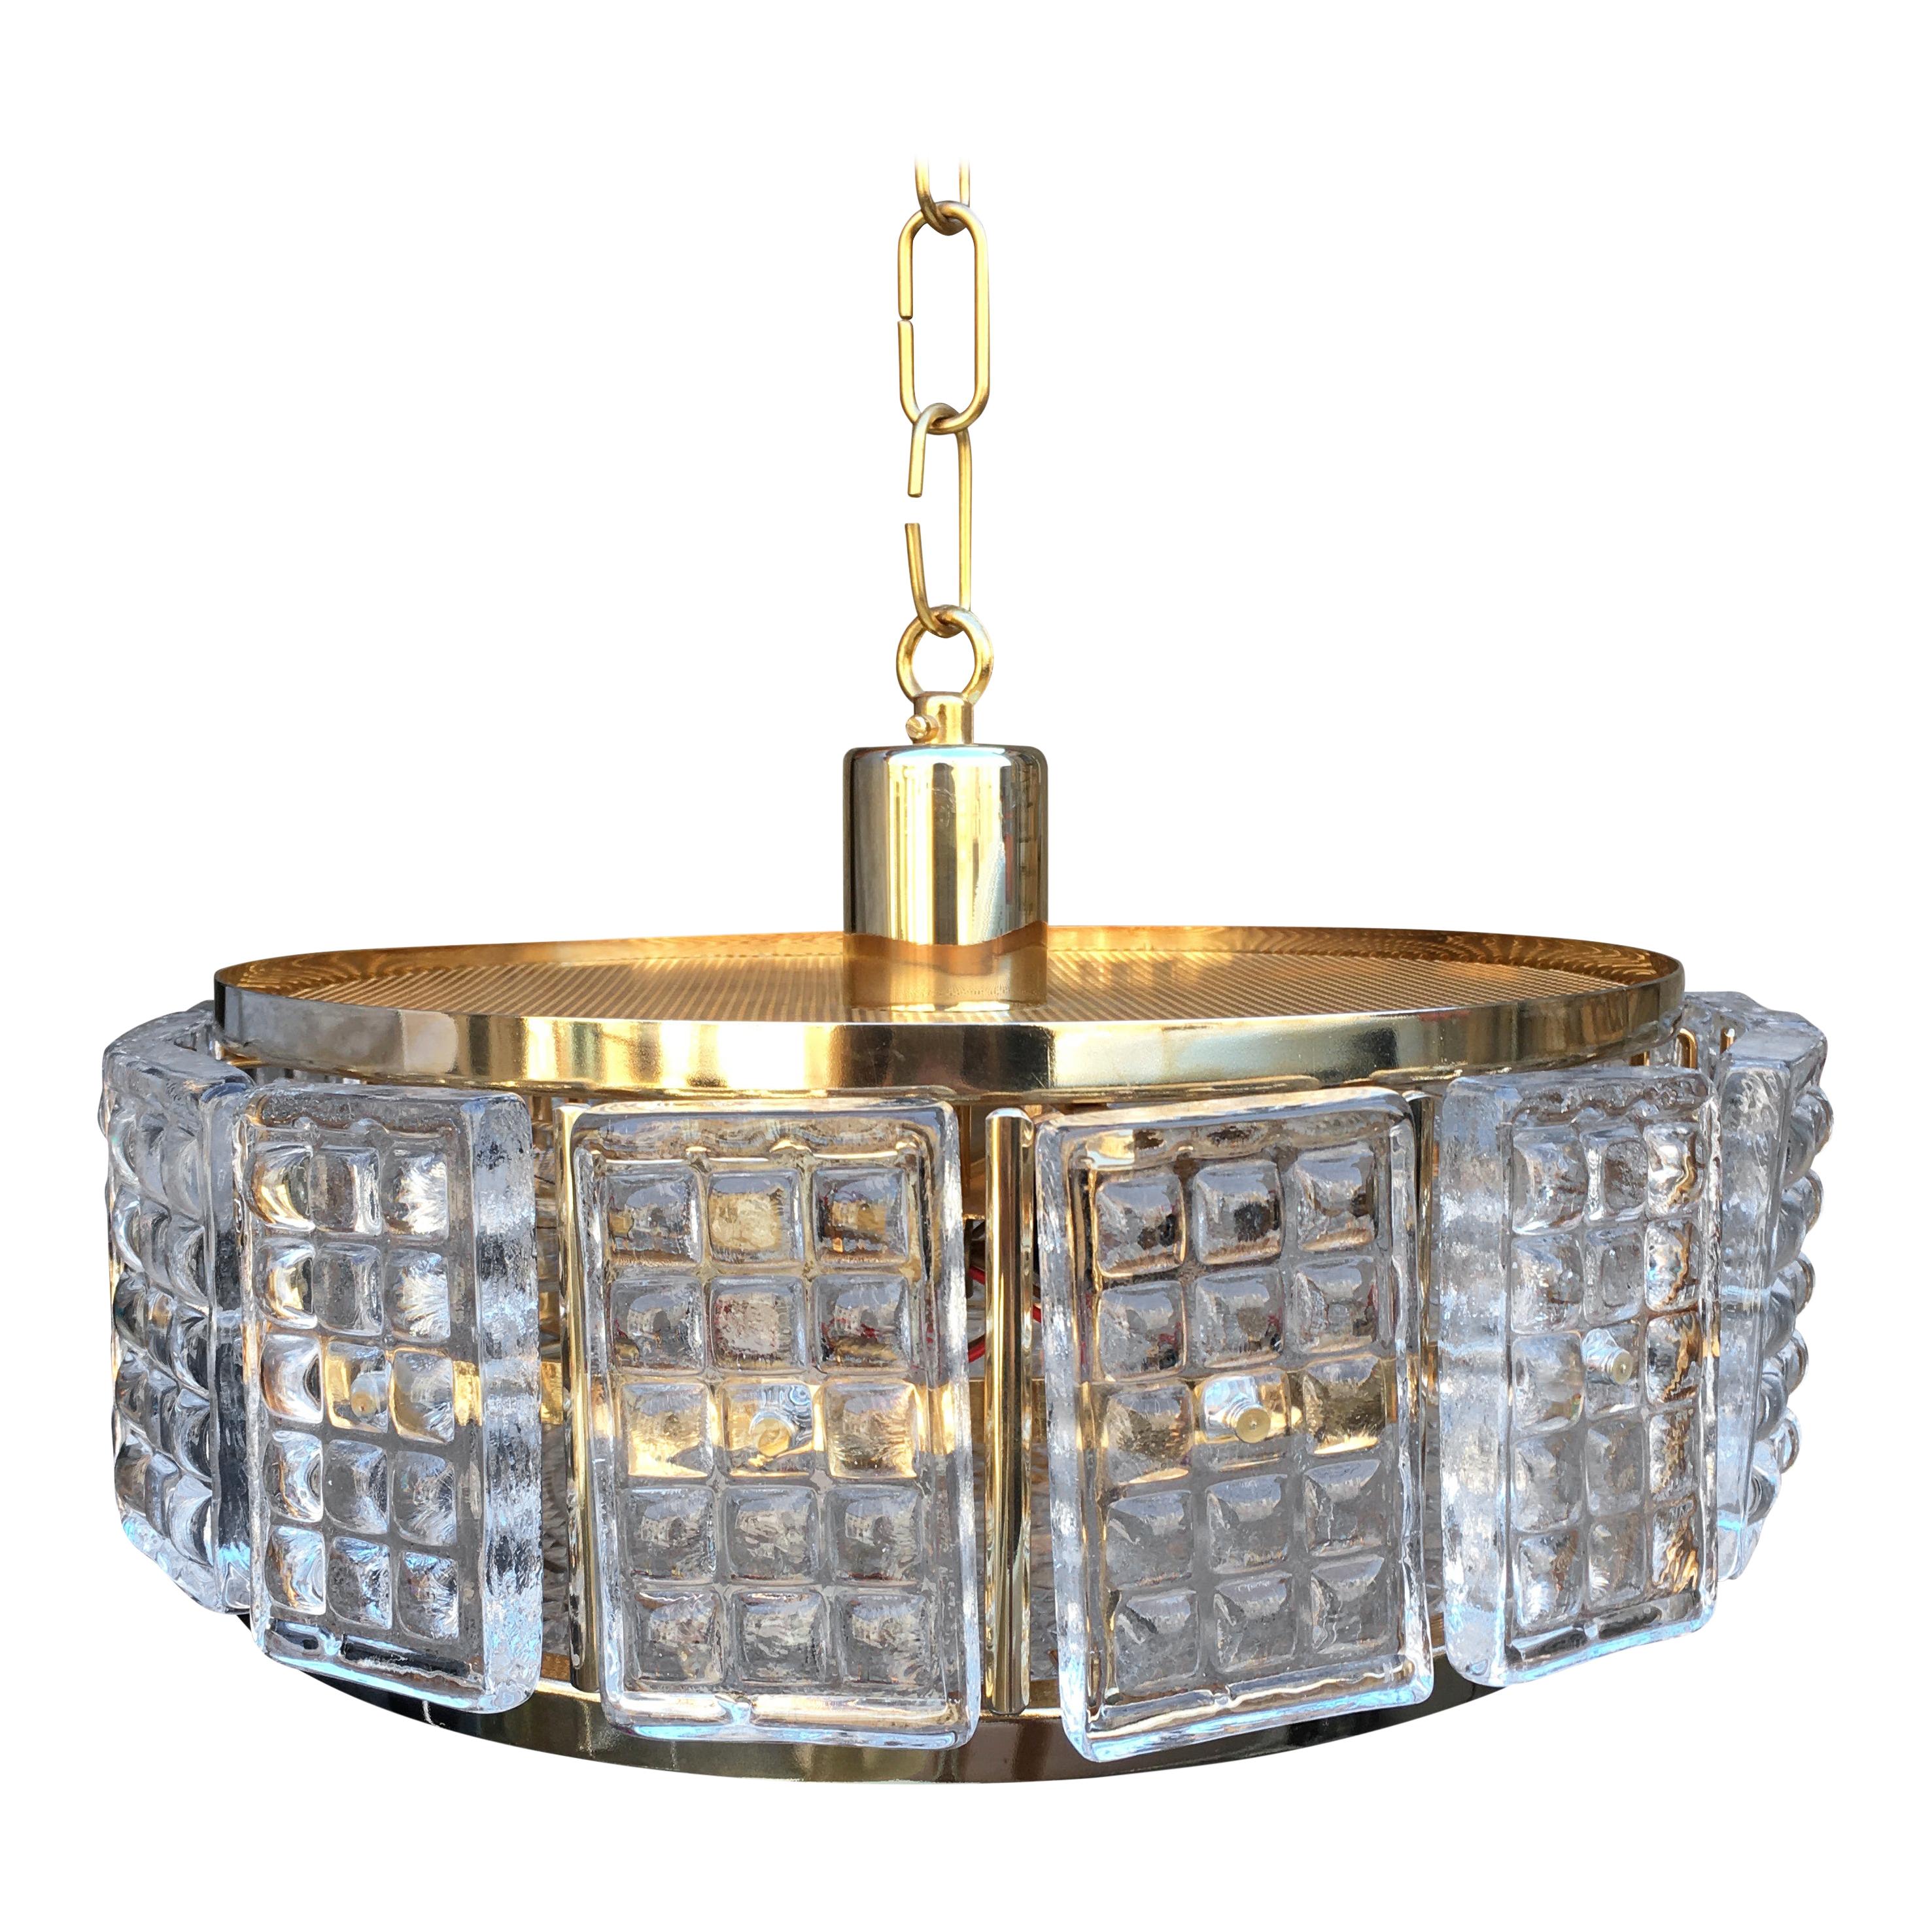 Midcentury Brass and Glass Ceiling Lamp by Carl Fagerlund for Orrefors, 1960s For Sale